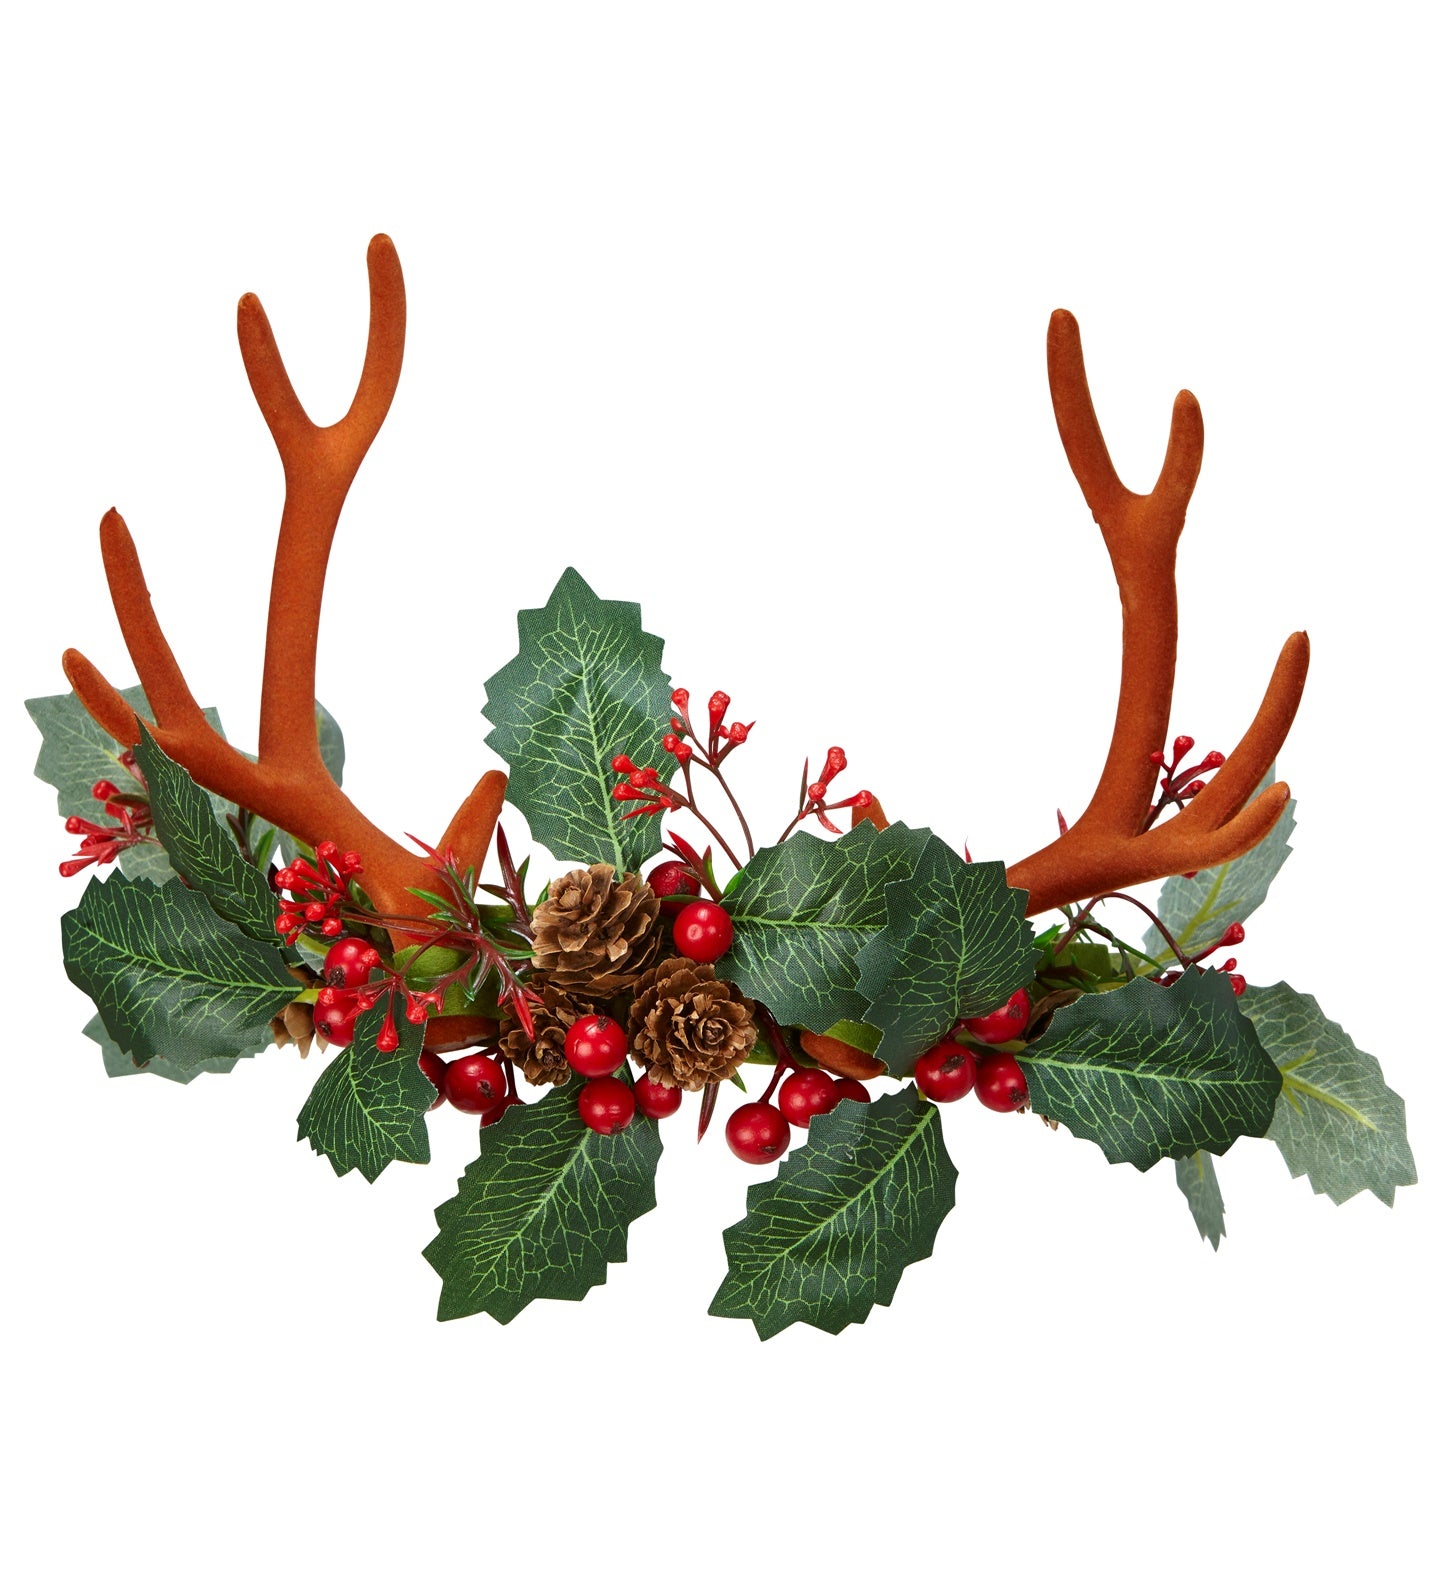 Reindeer Antlers with Holly and Pinecones